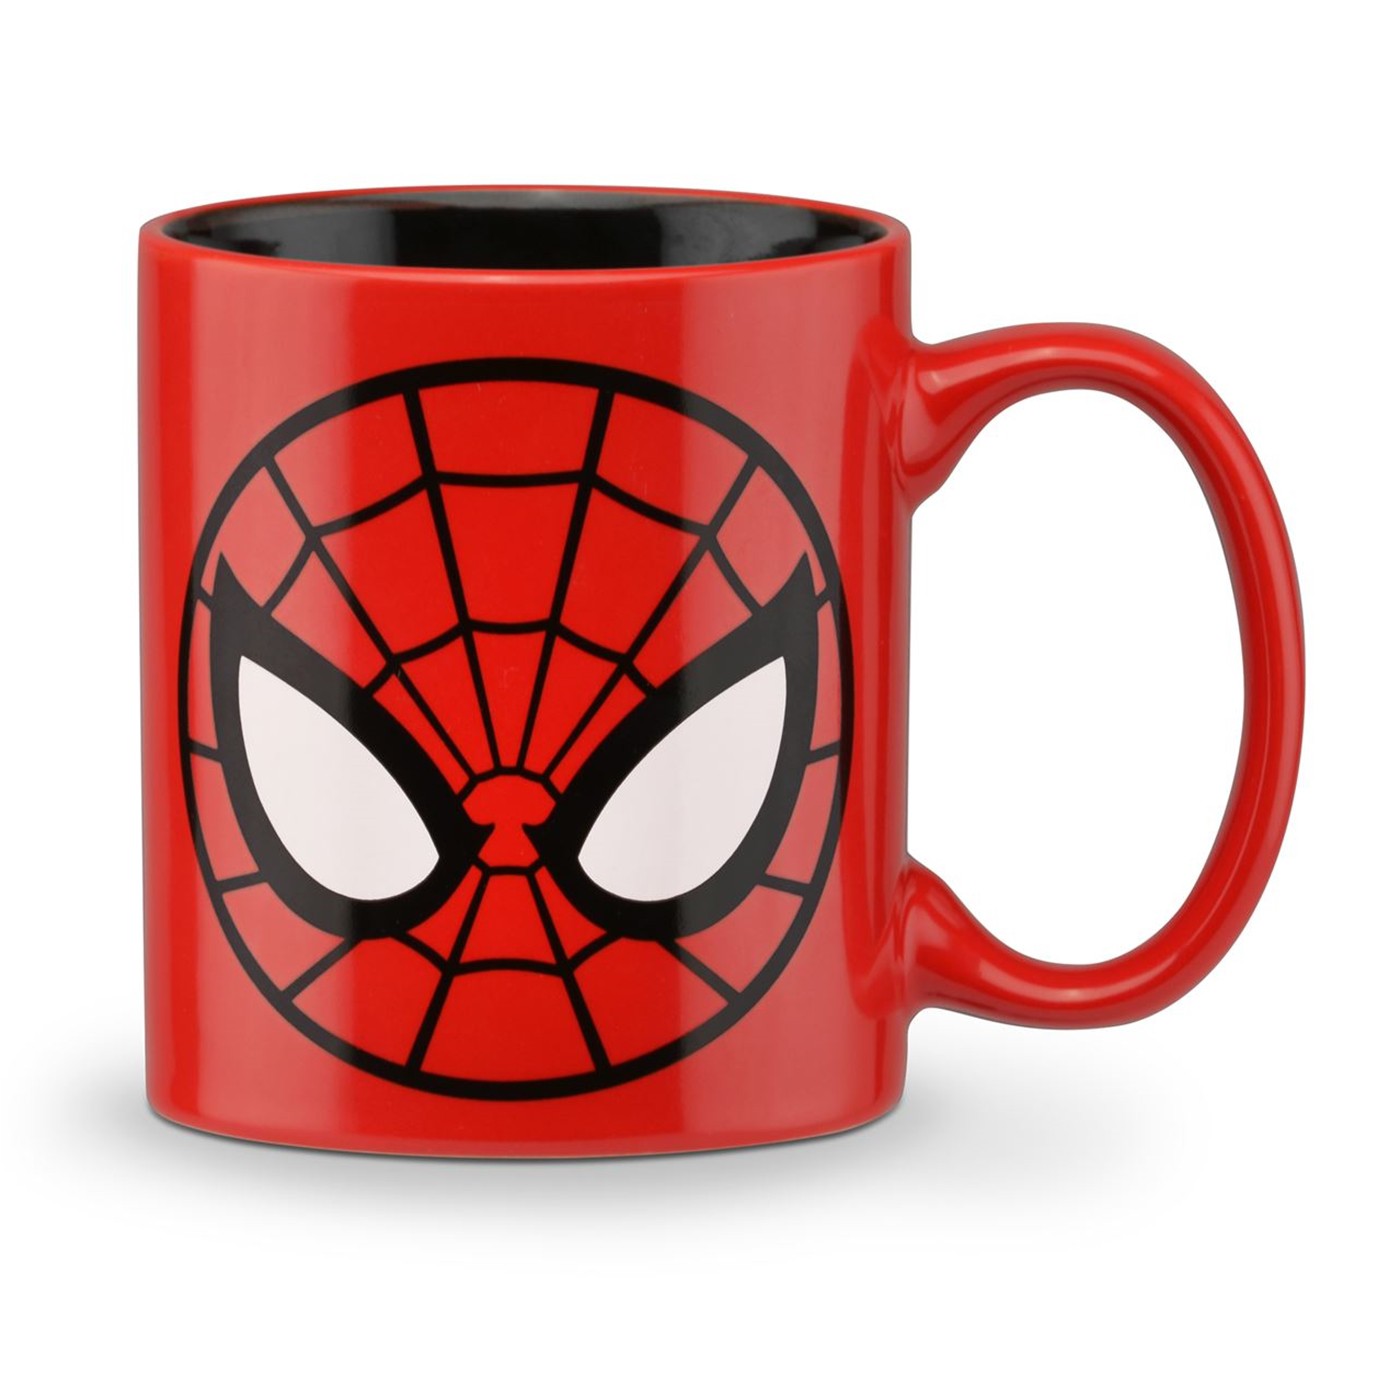 Spider-Man 1-Cup Coffee Maker with Mug